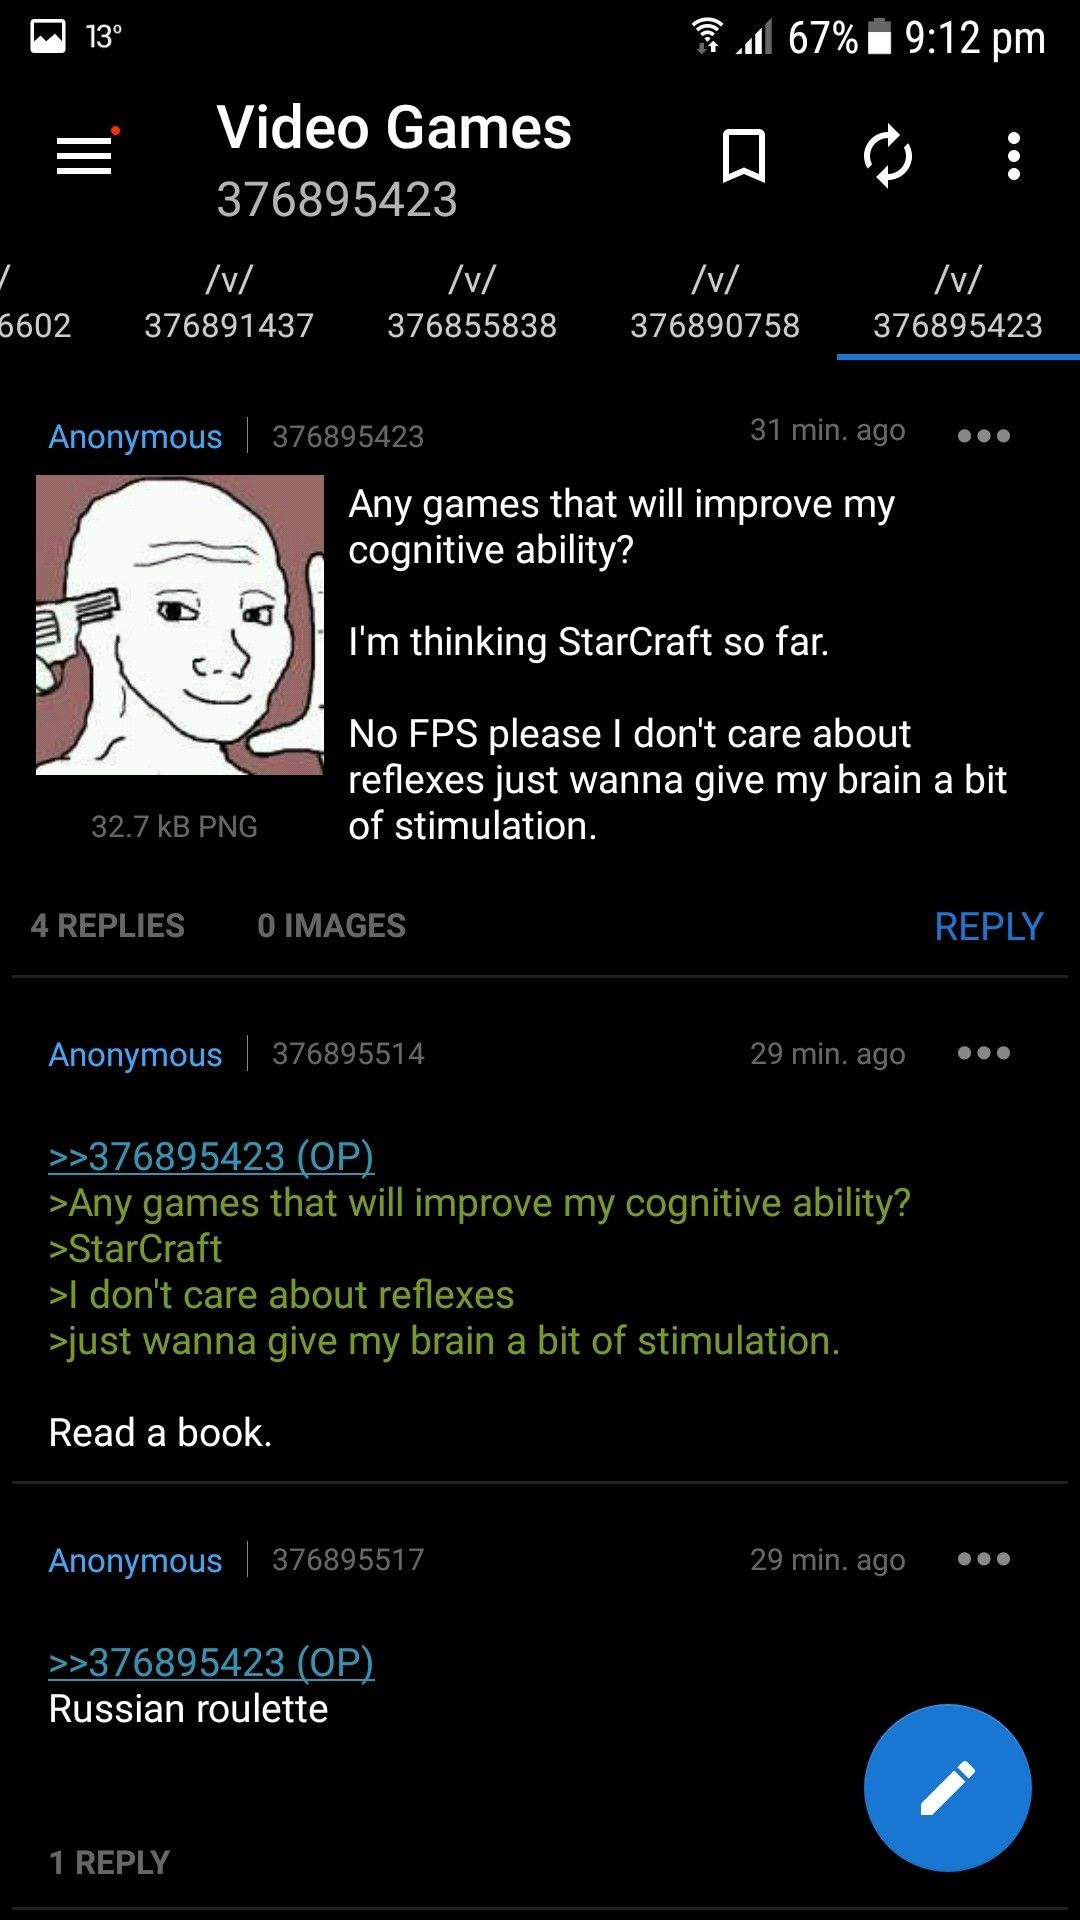 Anon searches a game